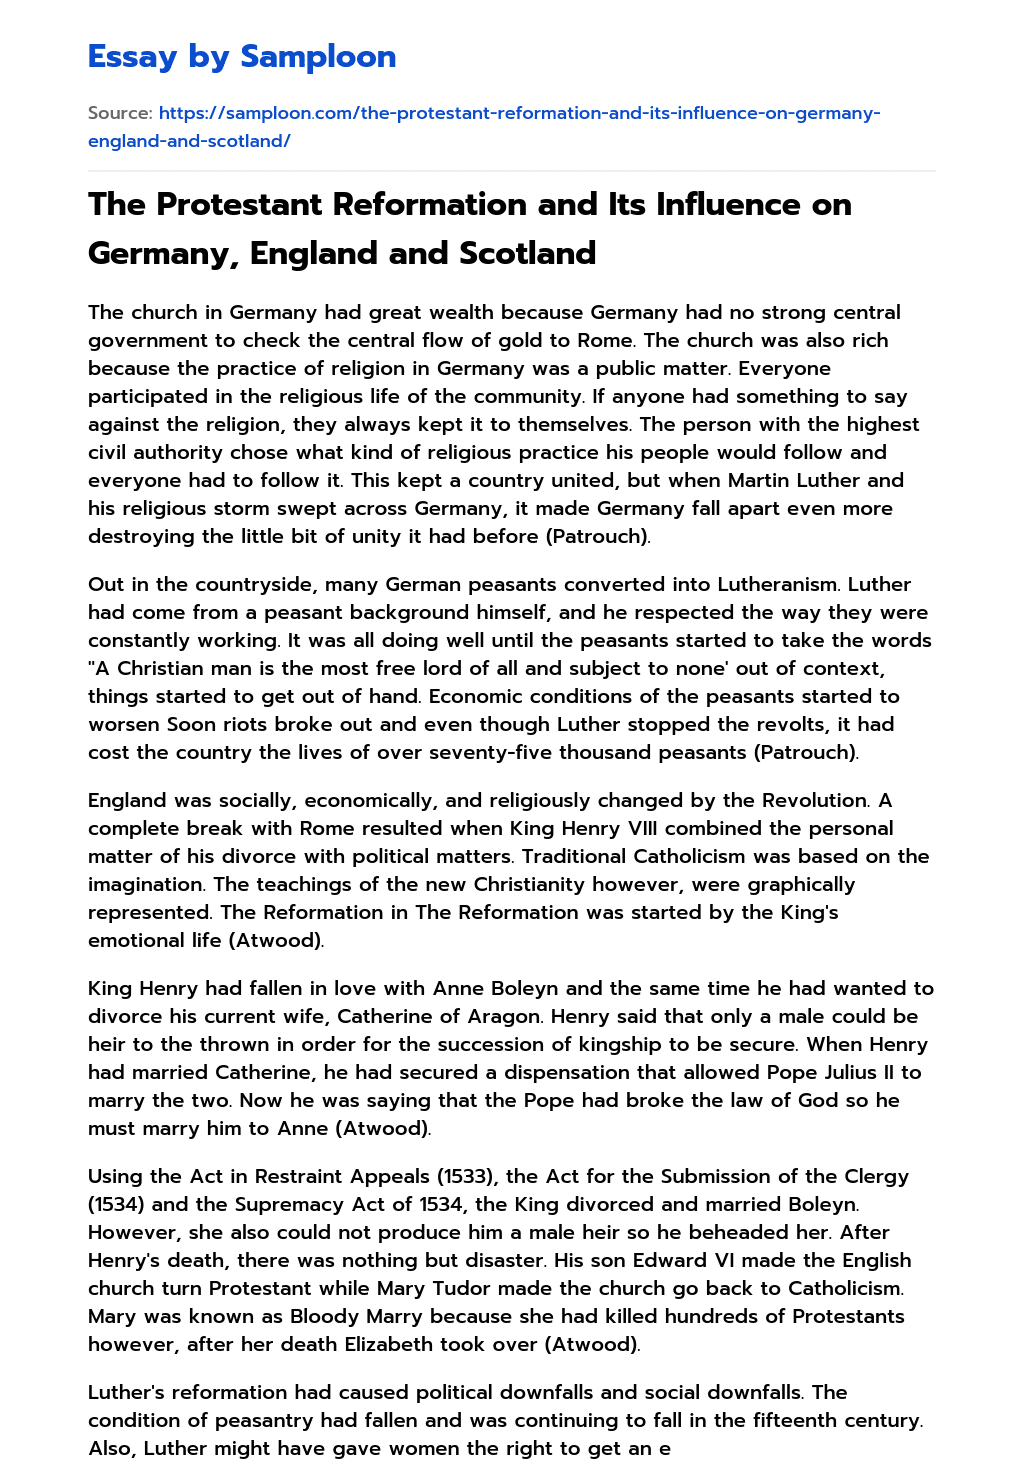 The Protestant Reformation and Its Influence on Germany, England and Scotland essay